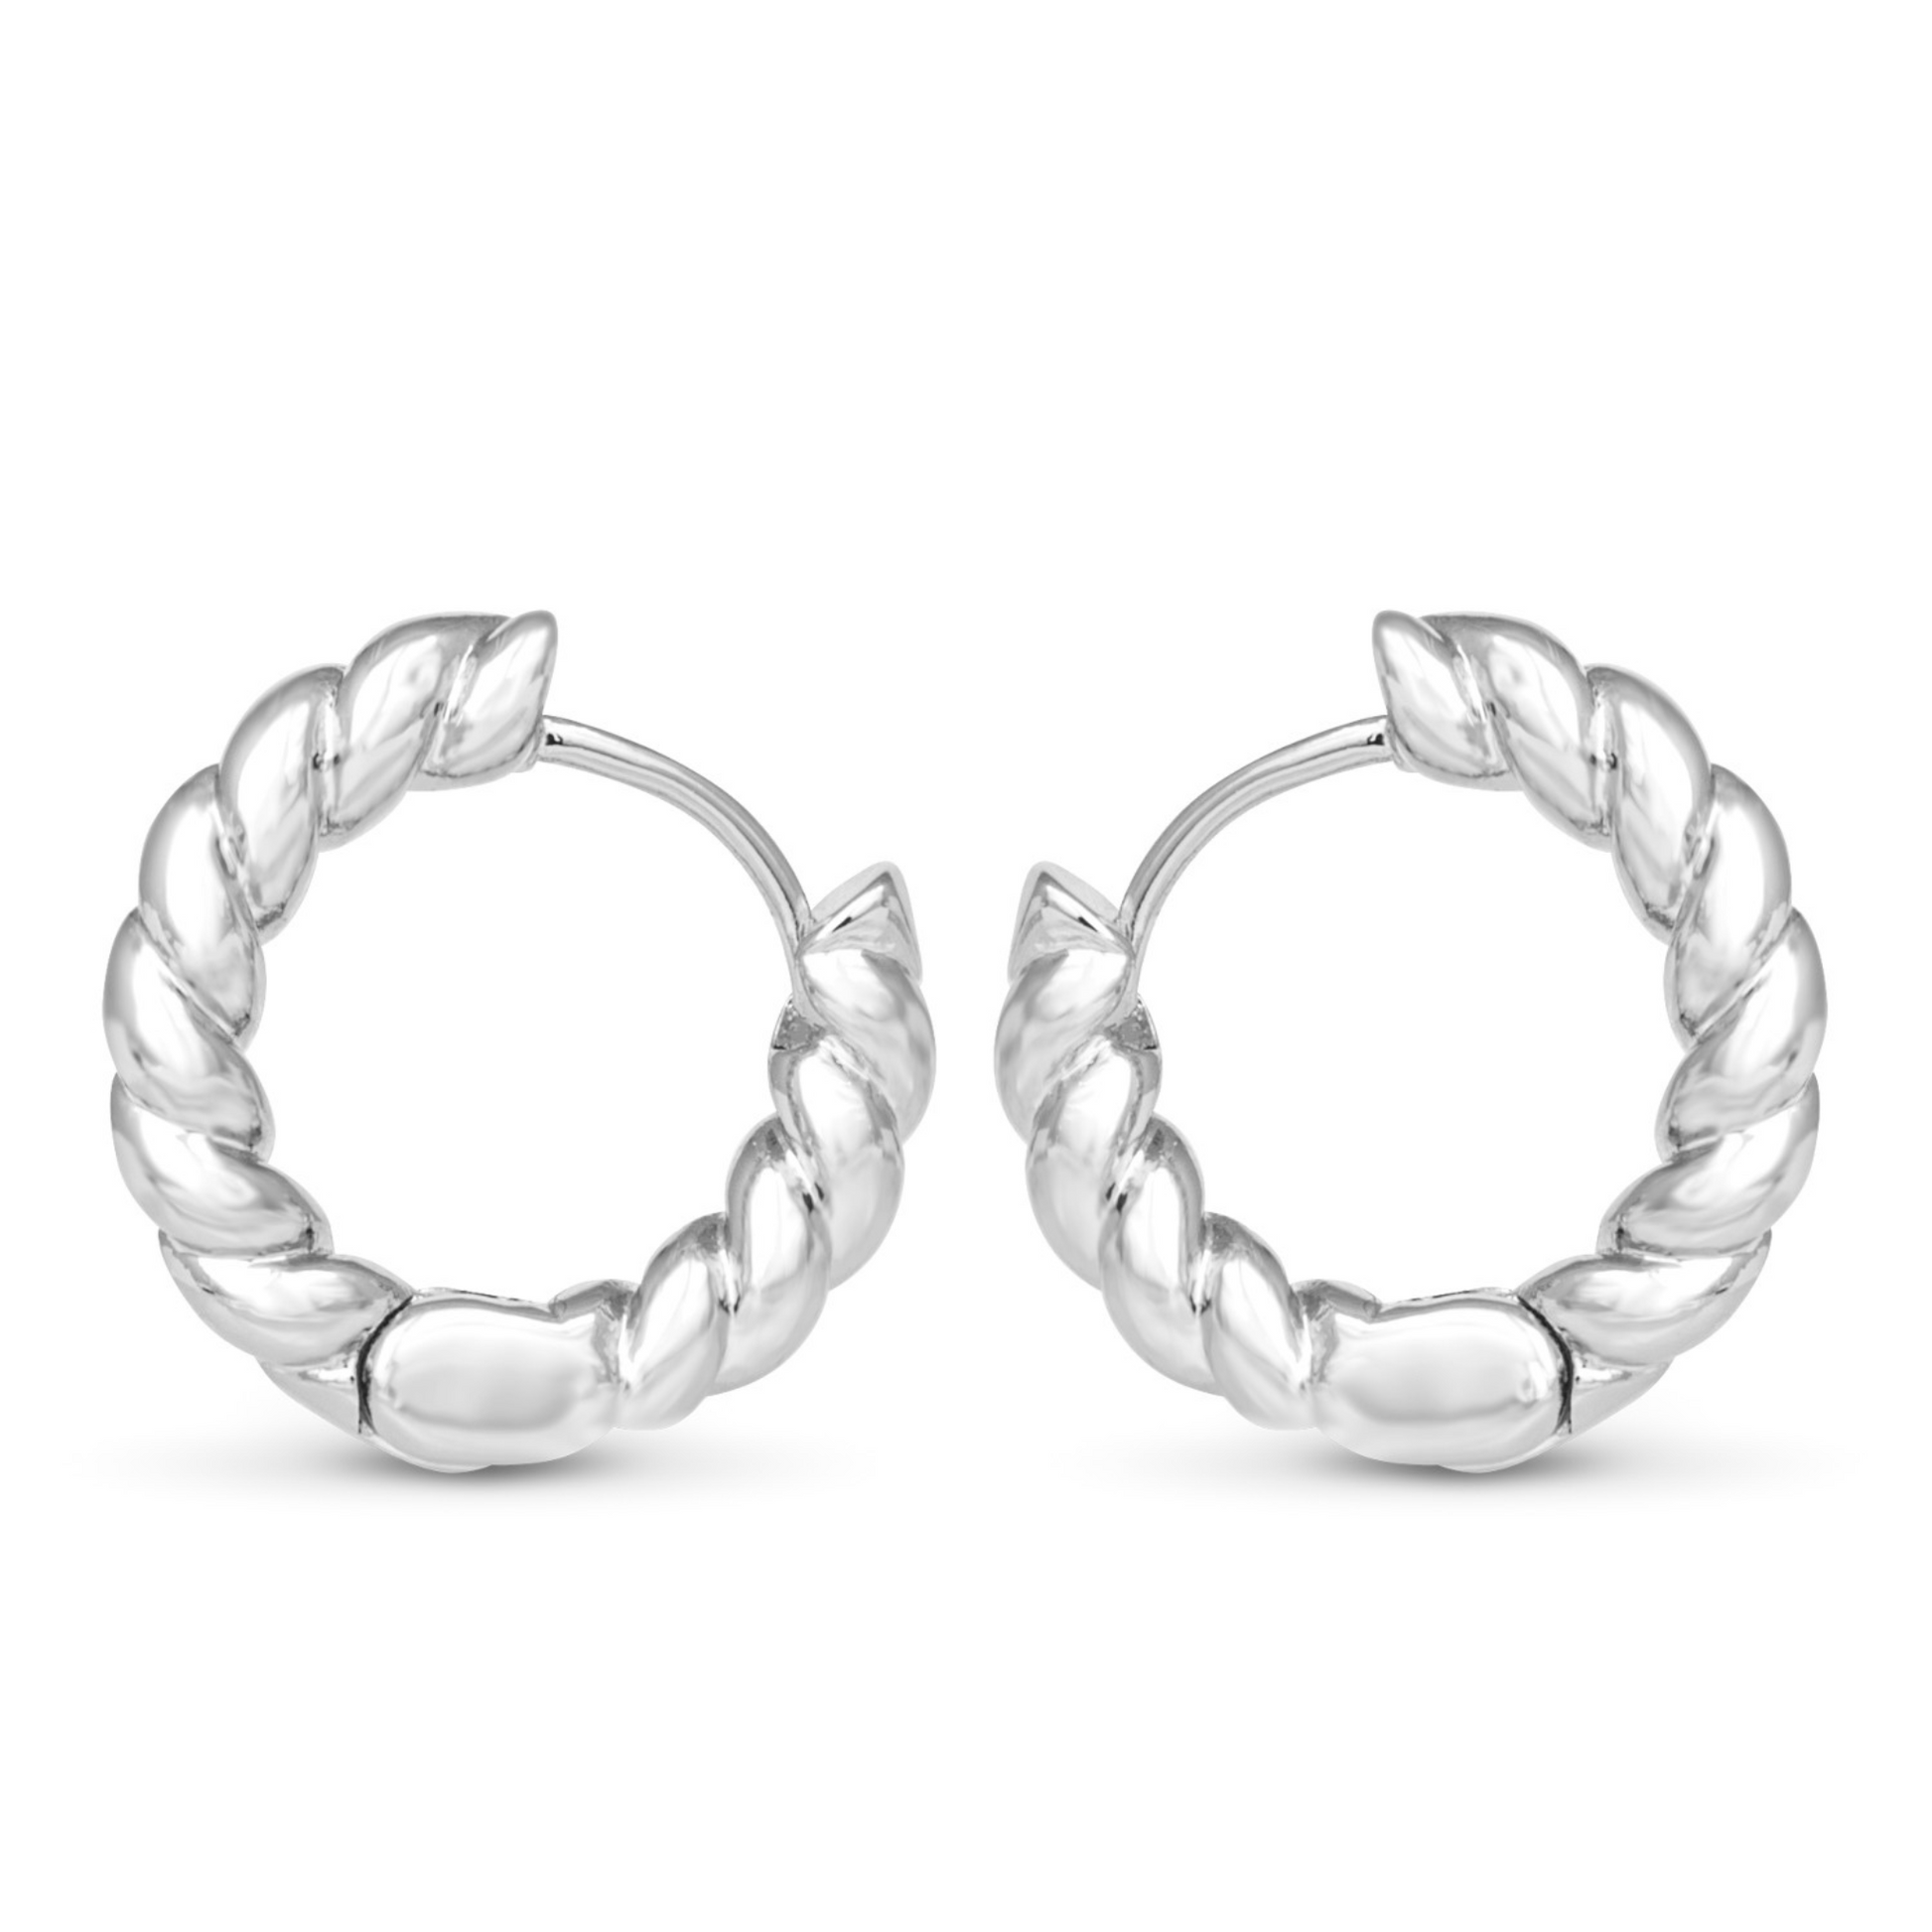 These Clara Mini Rope Hoops are expertly crafted from high-quality silver, making them a durable and stylish addition to your jewelry collection. The delicate rope design adds a unique touch to classic hoop earrings, perfect for elevating any outfit. Invest in timeless elegance with these beautiful and versatile earrings.